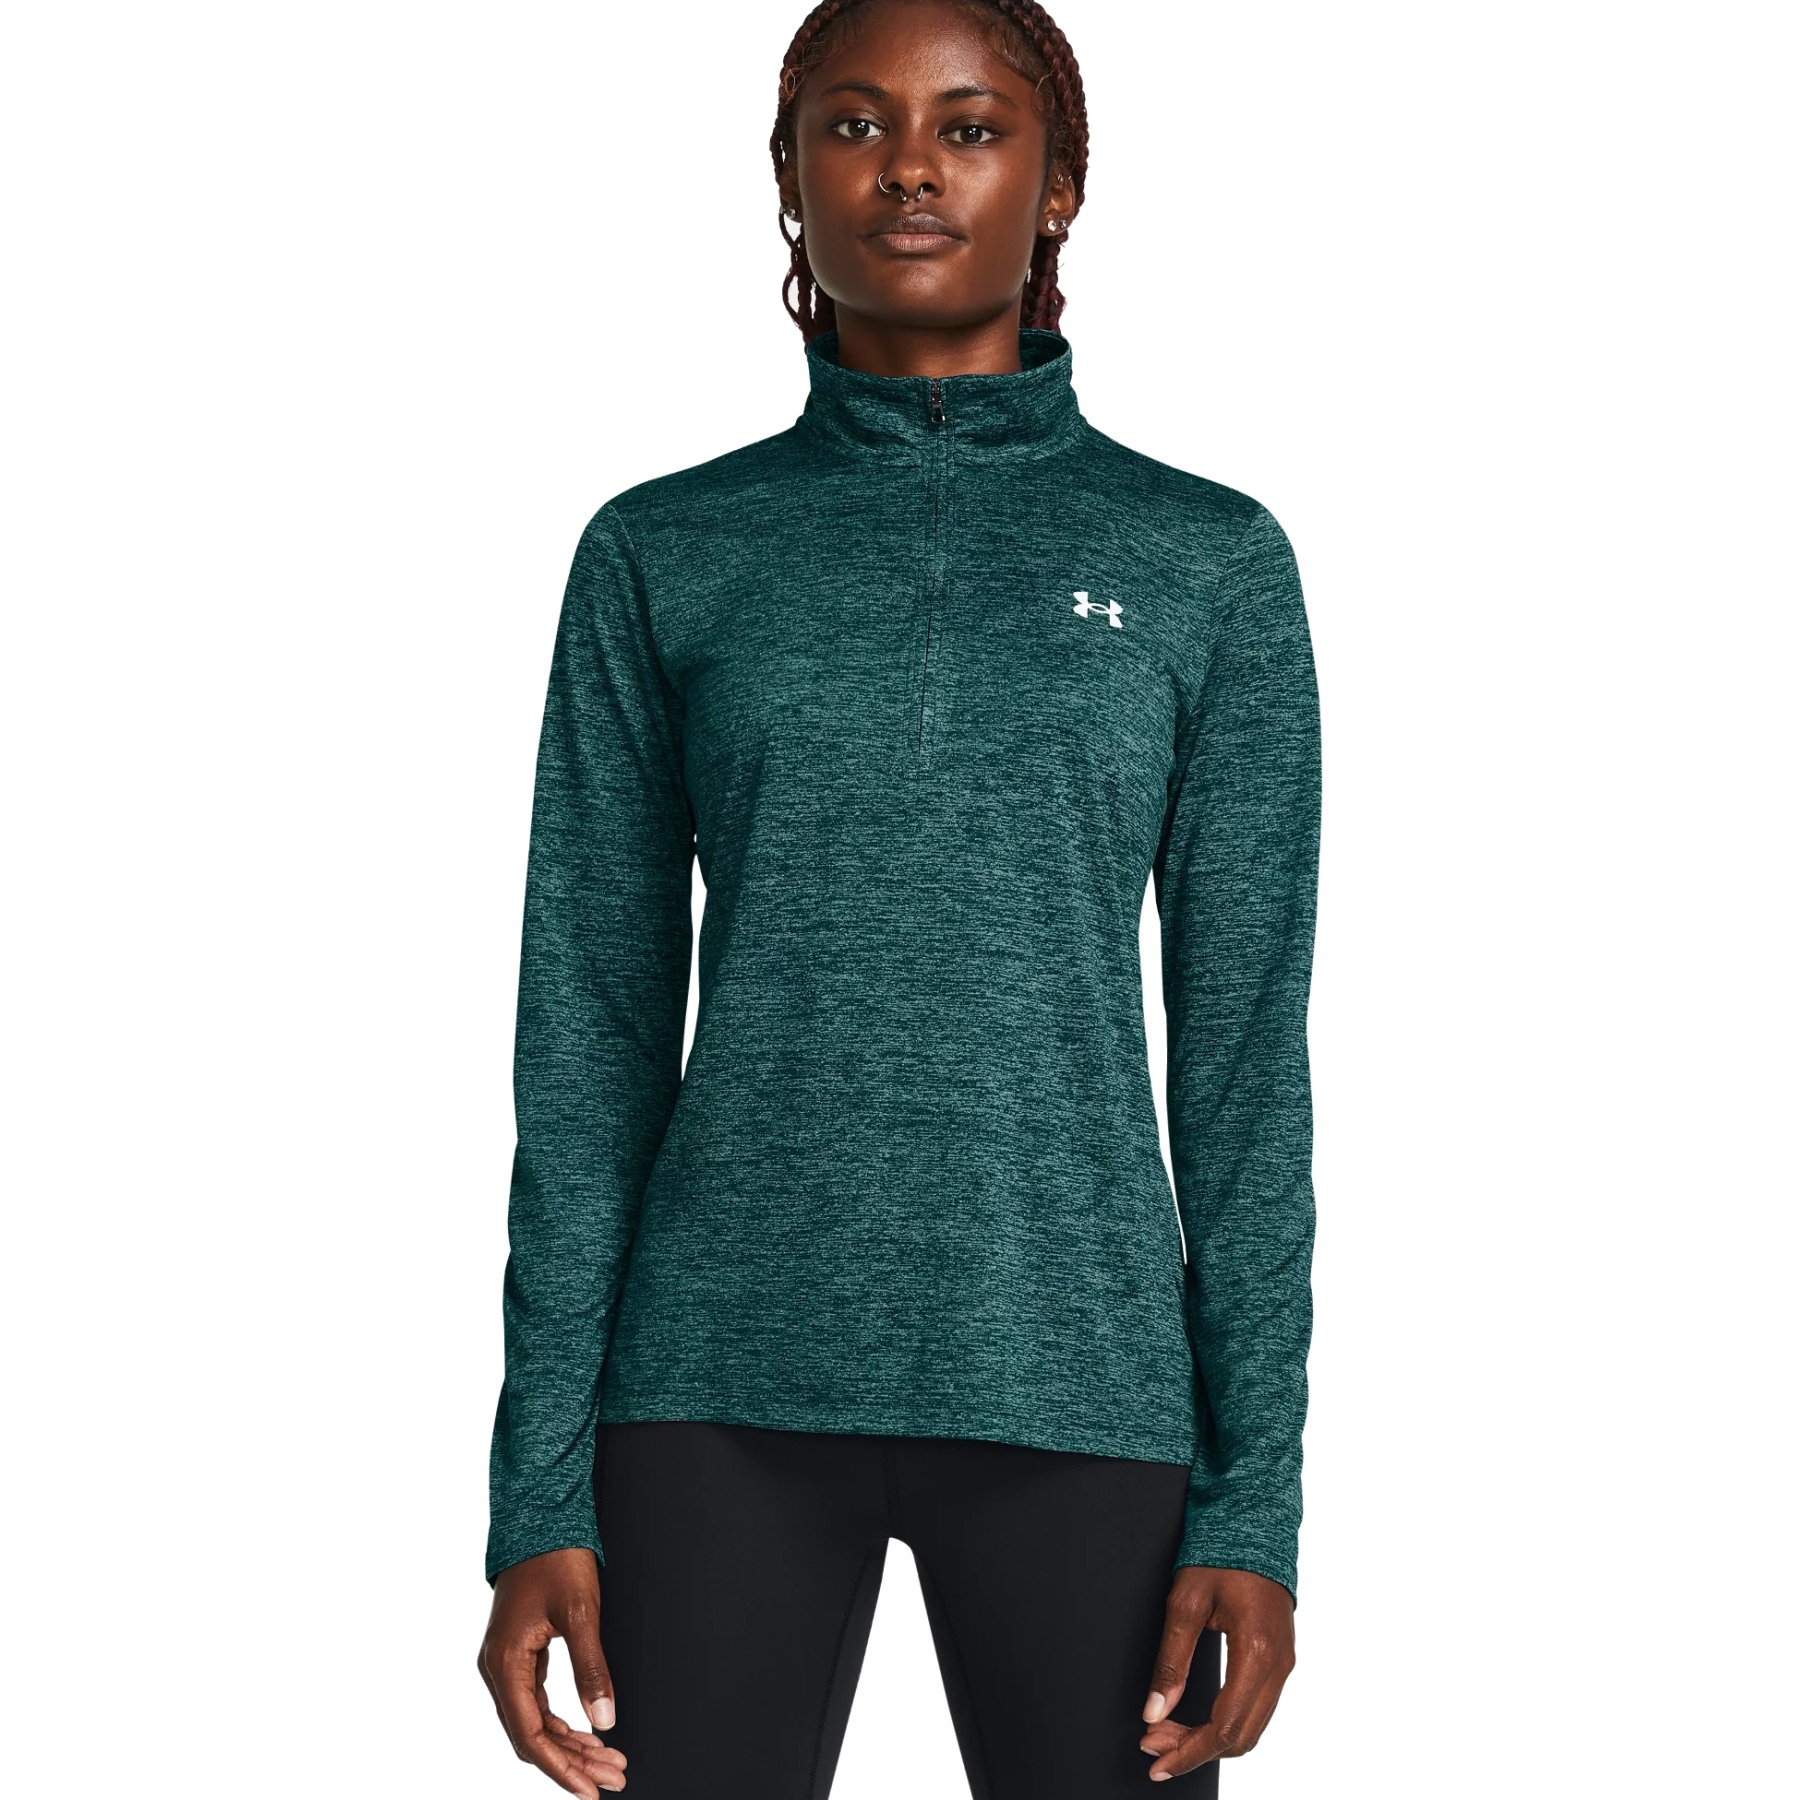 Picture of Under Armour UA Tech™ Twist 1/2 Zip Long Sleeve Top Women - Hydro Teal/White